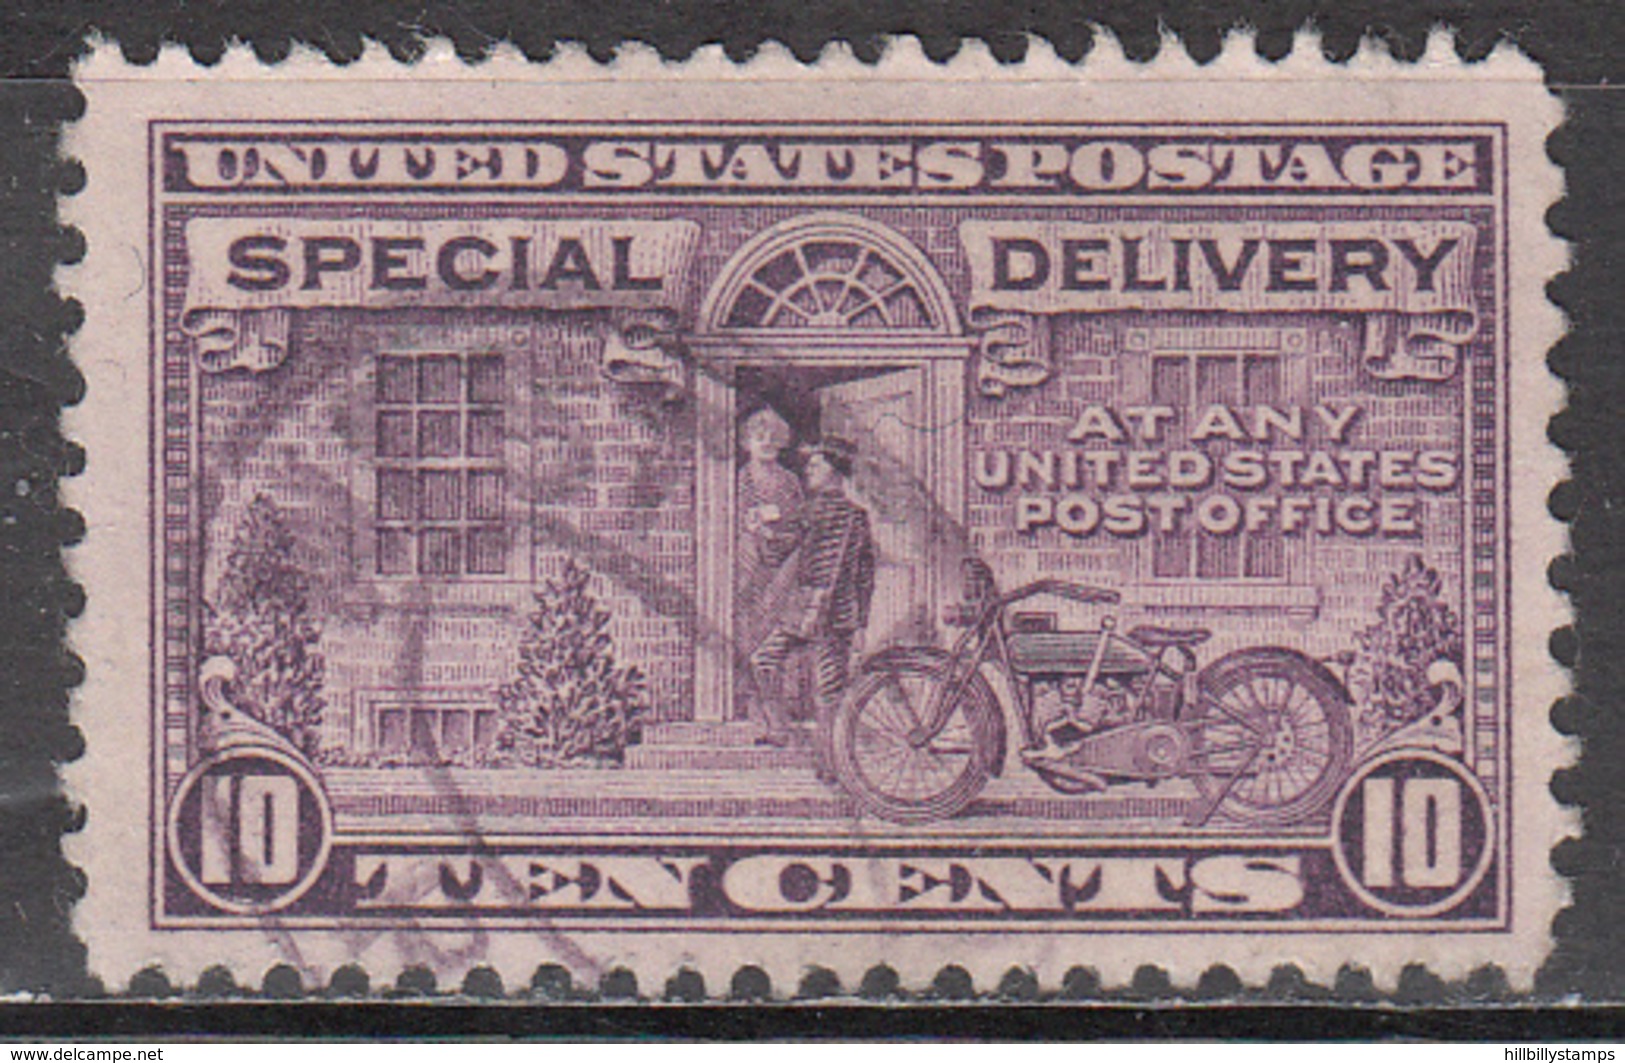 UNITED STATES      SCOTT NO.  E15    USED      YEAR  1927   PERF. 11X10.5 - Special Delivery, Registration & Certified